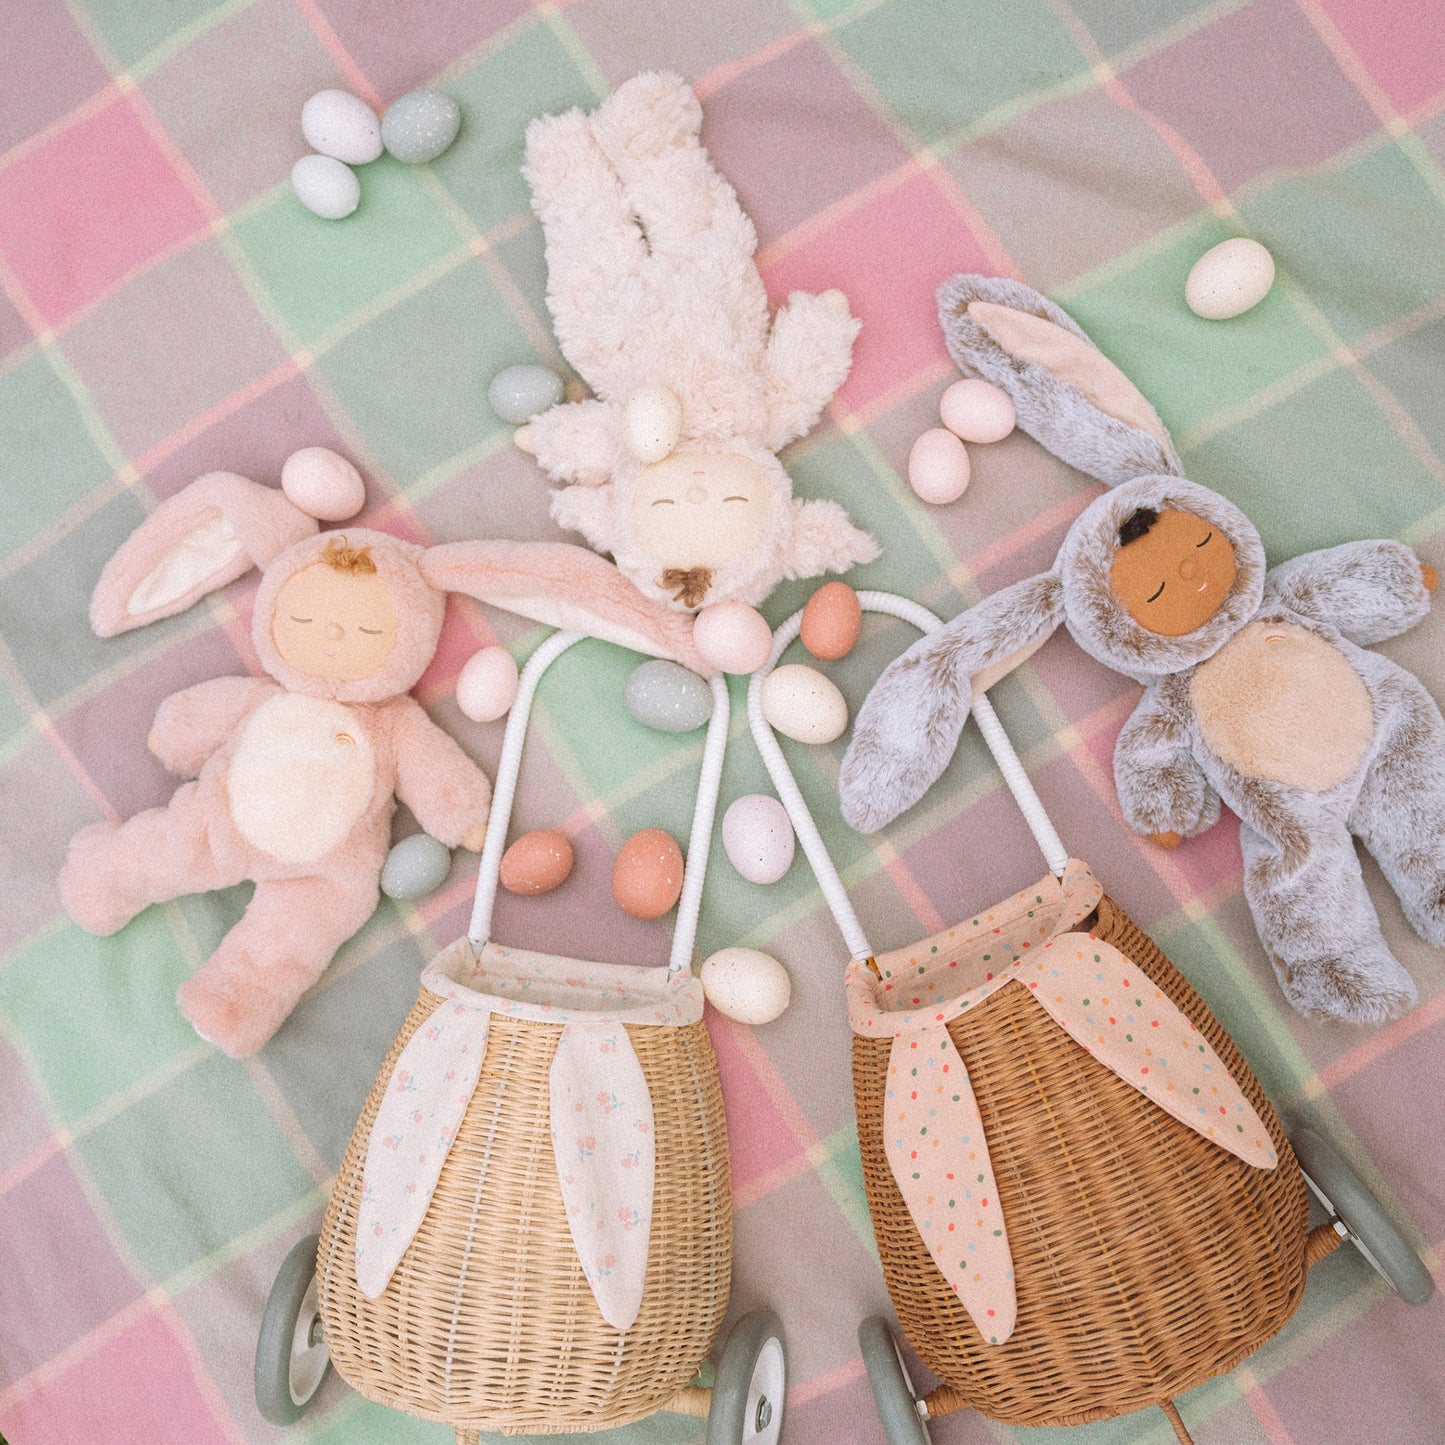 RATTAN BUNNY LUGGY WITH LINING
gumdrop